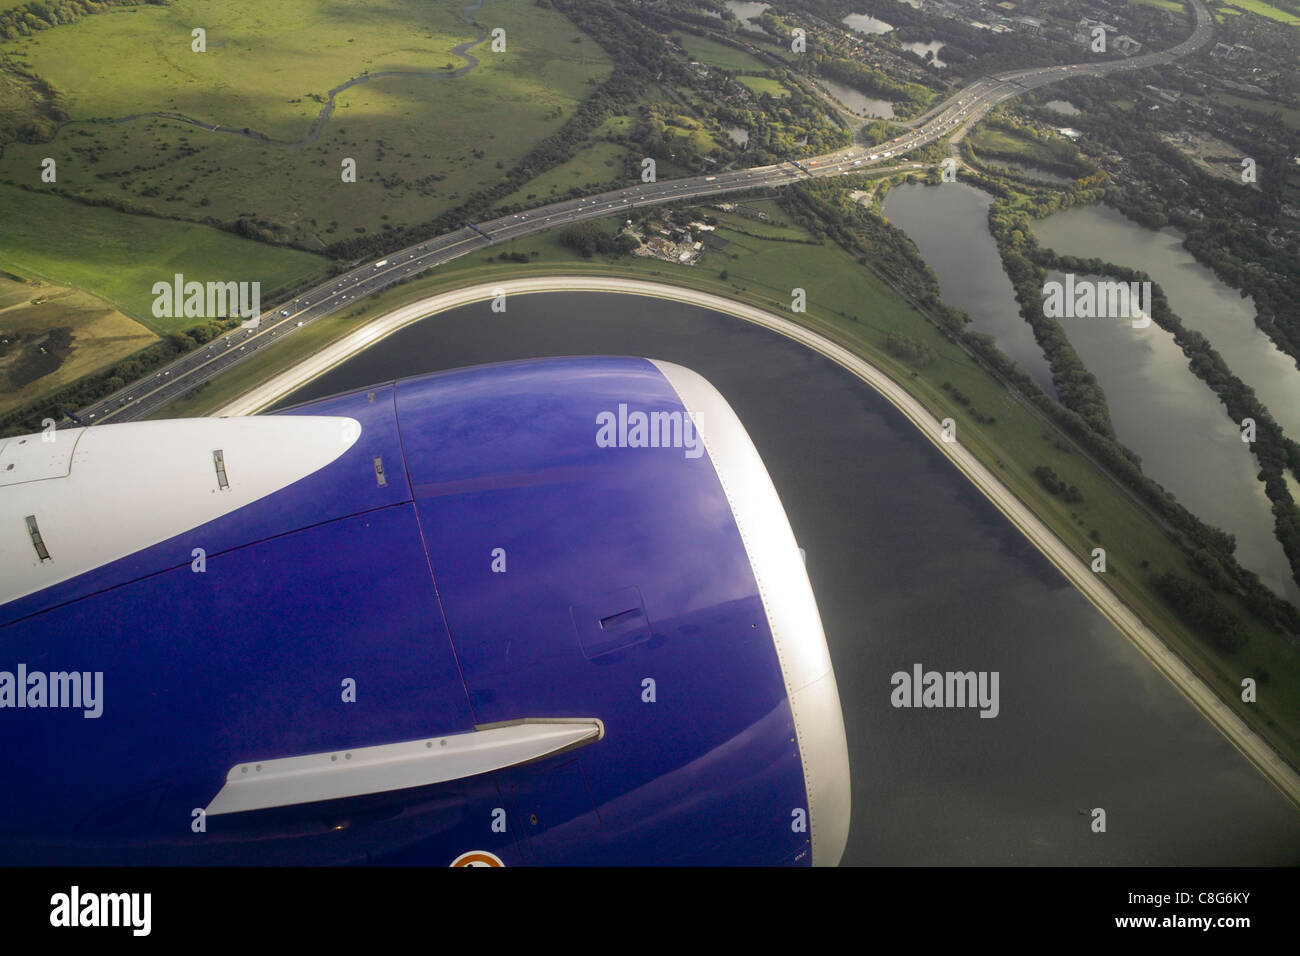 View from passenger jet aircraft window at  take off with engine in foreground and land with fields, water and roads below Stock Photo